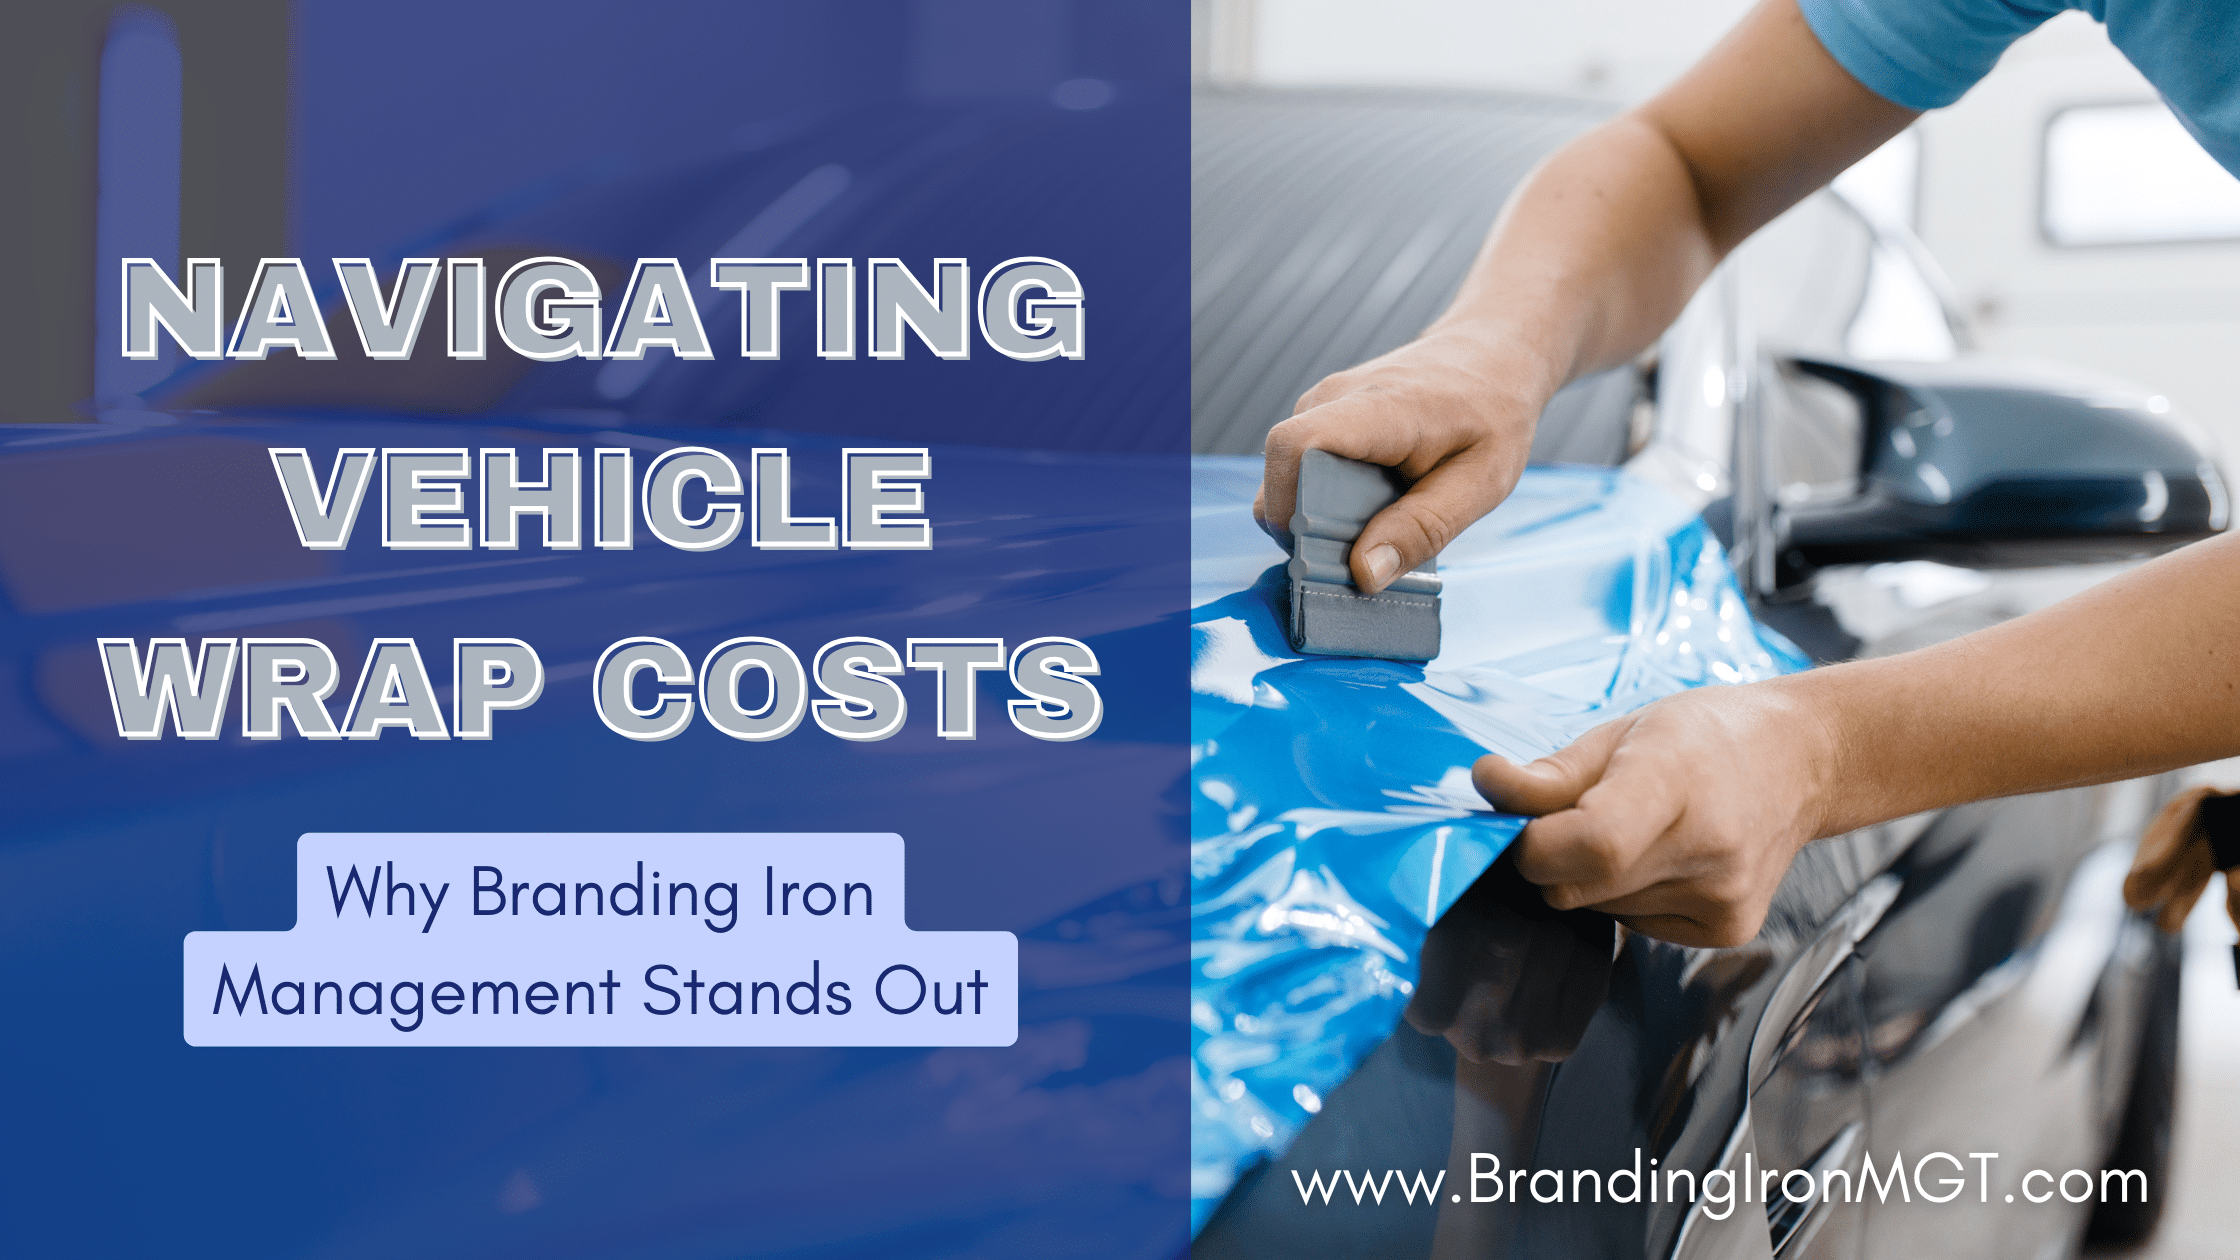 Navigating Vehicle Wrap Costs: Why Branding Iron Management Stands Out